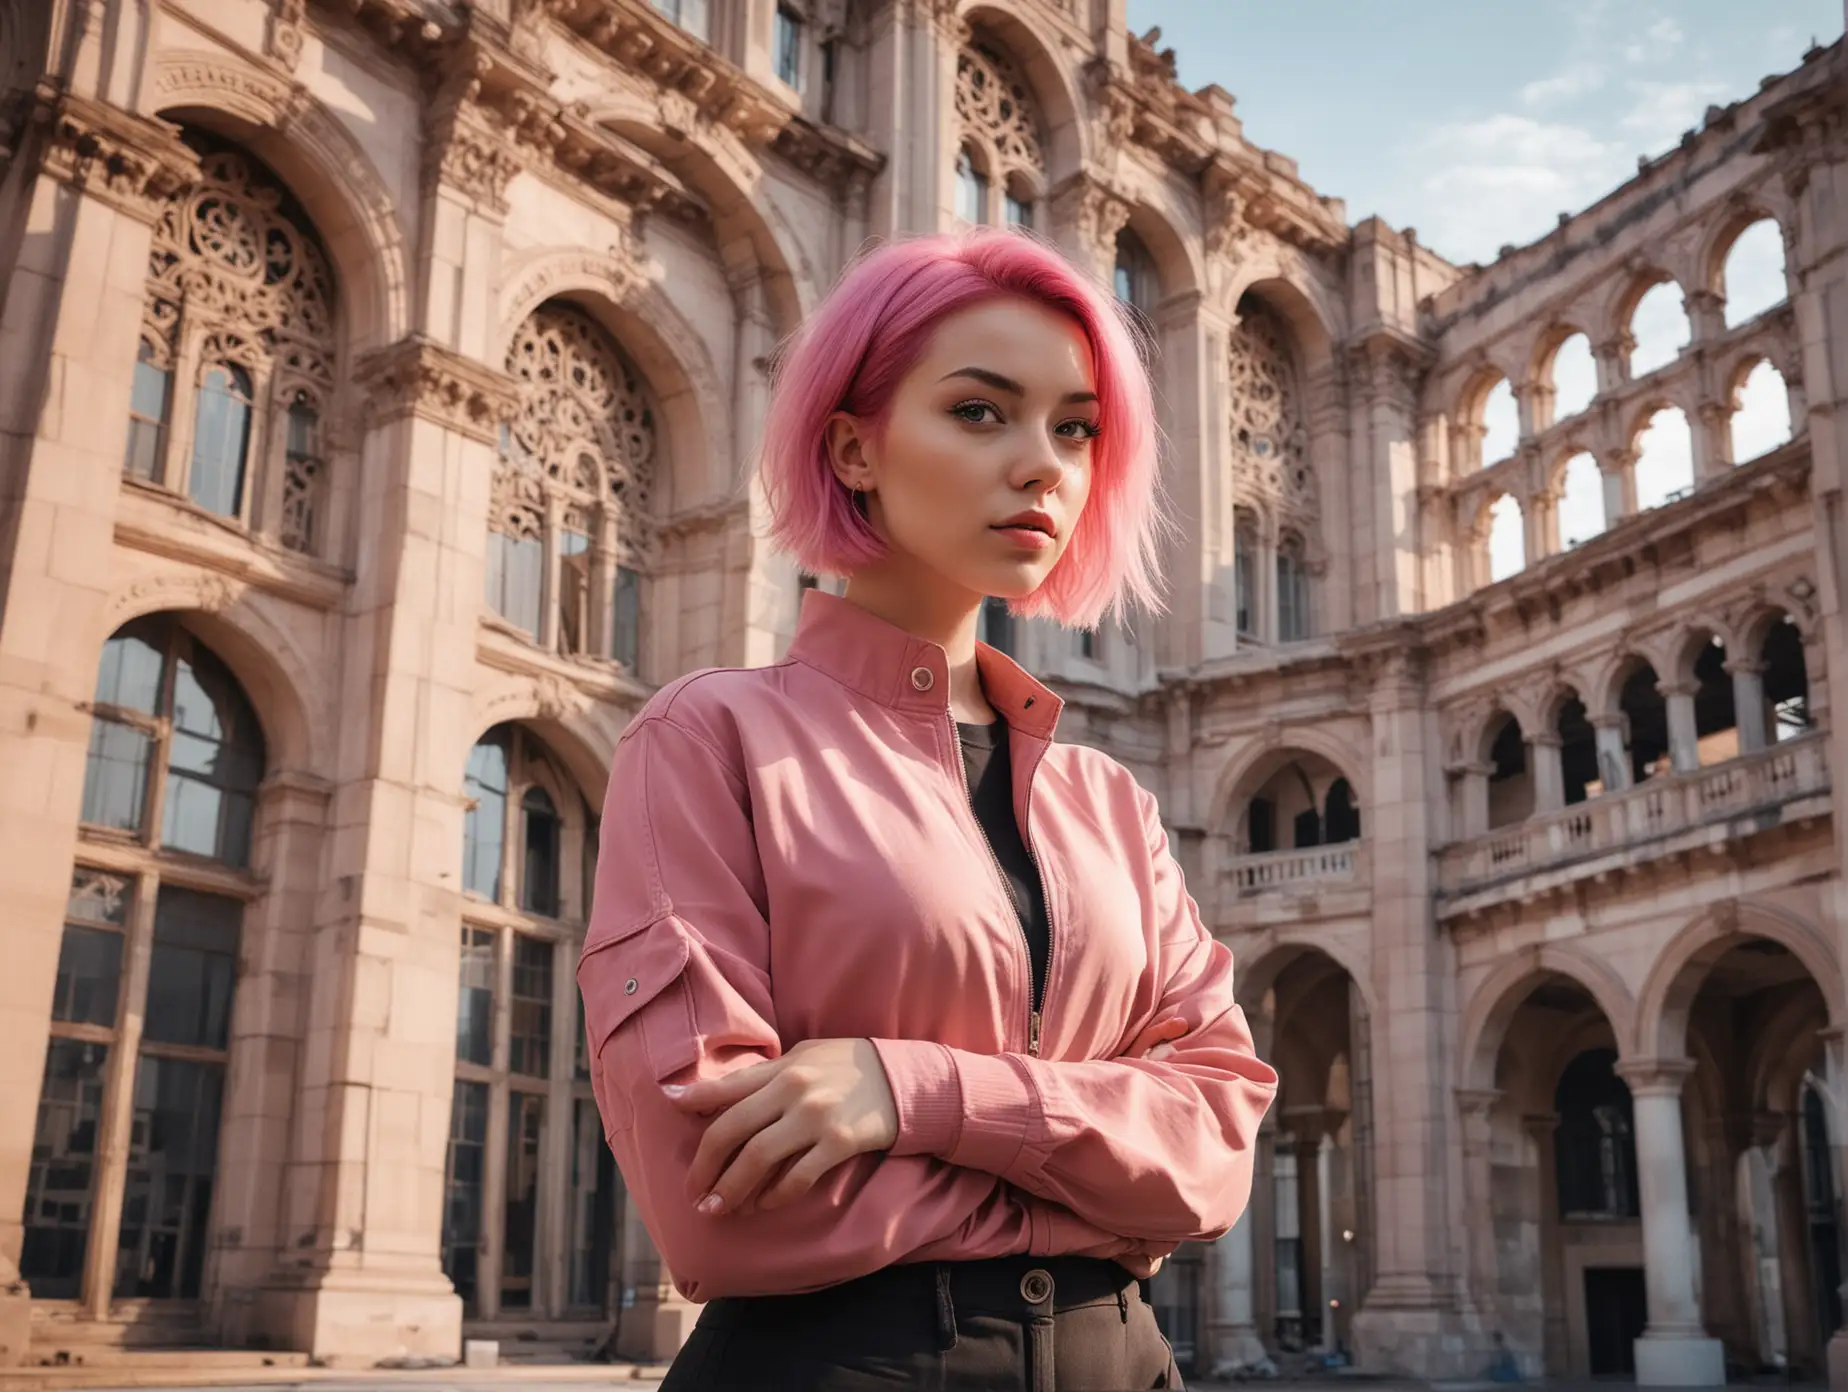 Character: The confident architect strategist girl with INTJ (Introvert-Intuitive-Thinking-Judging) personality type. She's generally structured, analytical, and strategic-minded, and this should reflect in her image. She has short pink hair which adds creativity to her image and reflects her unique style.
Background: She stands in front of a massive architectural structure which she designed, against a vivid raspberry sky that adds contrast and captures attention.
Pose: Her pose exudes confidence and strength as she stands in front of her architectural creation. Perhaps she stands with blueprints or a model of her project to emphasize her role as an architect strategist.
Details and accessories: She can be dressed in professional and stylish clothing that mirrors her character and relates back to her role as a strategist and architect. Don't forget to include elements that reflect her penchant for structured thinking and analytics.